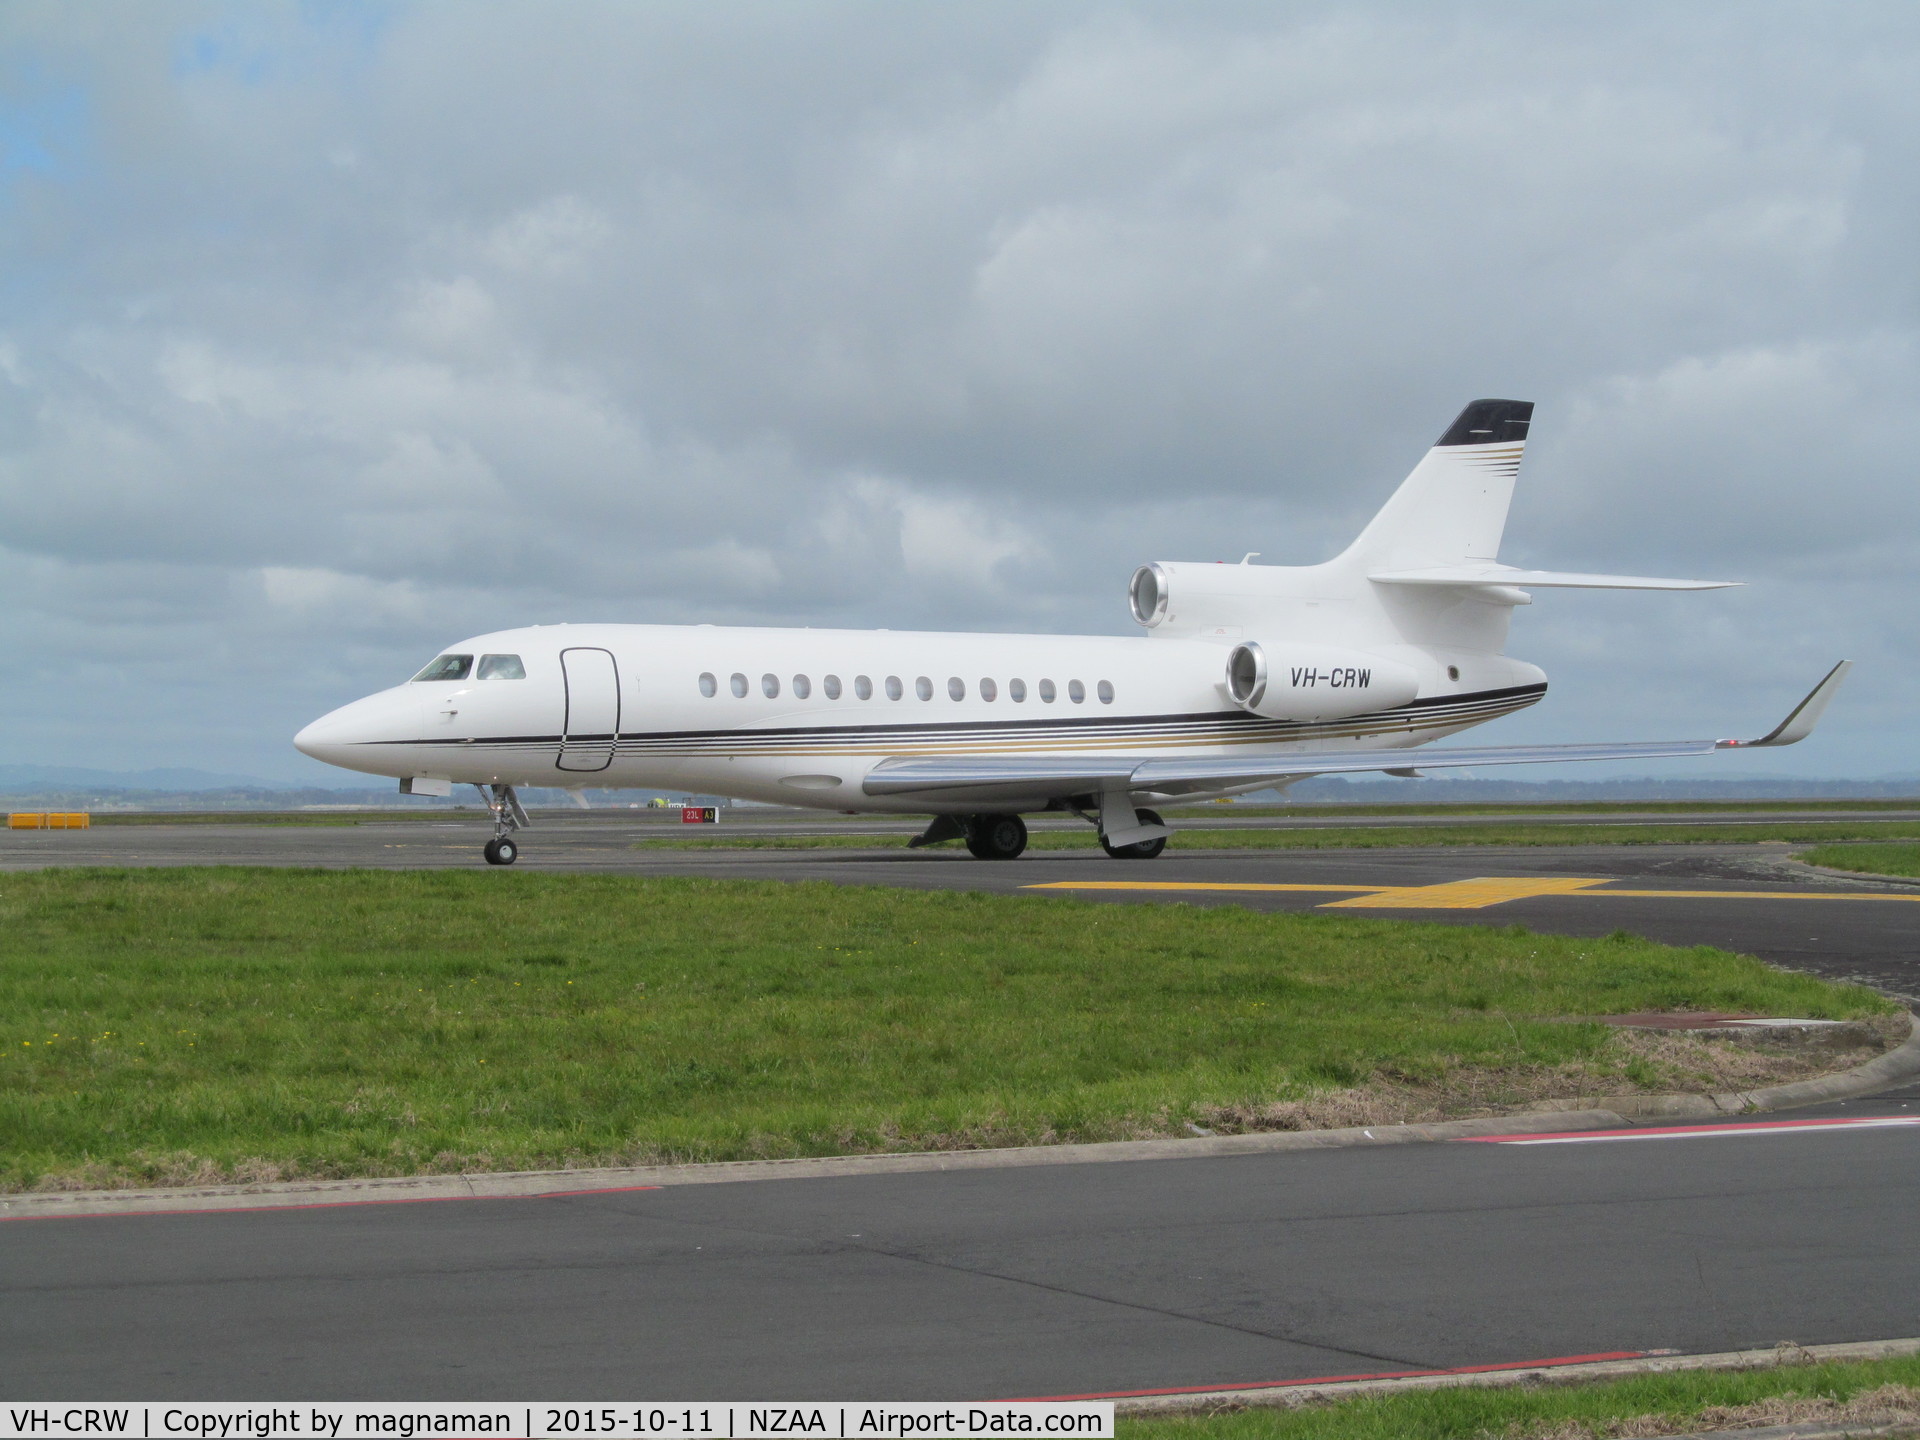 VH-CRW, 2013 Dassault Falcon 7X C/N 217, taxying out